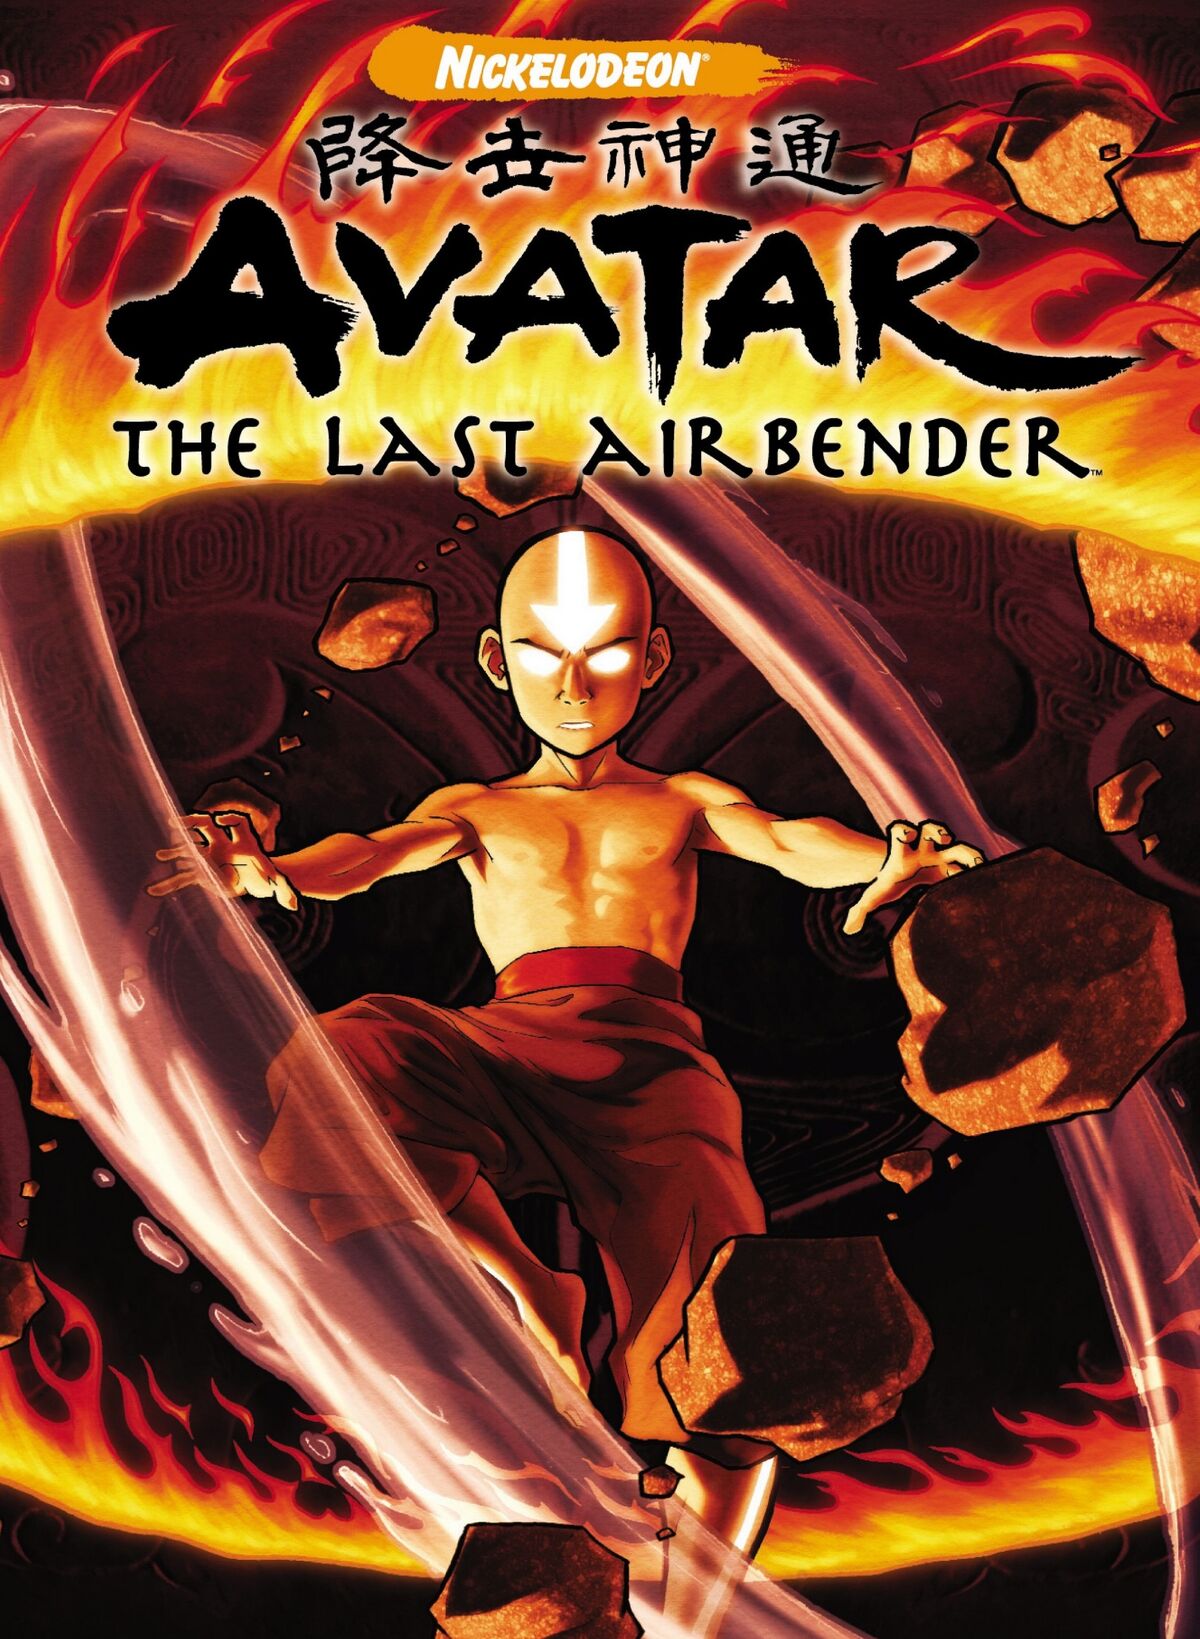 Avatar: The Last Airbender The Earth King (TV Episode 2006) - IMDb